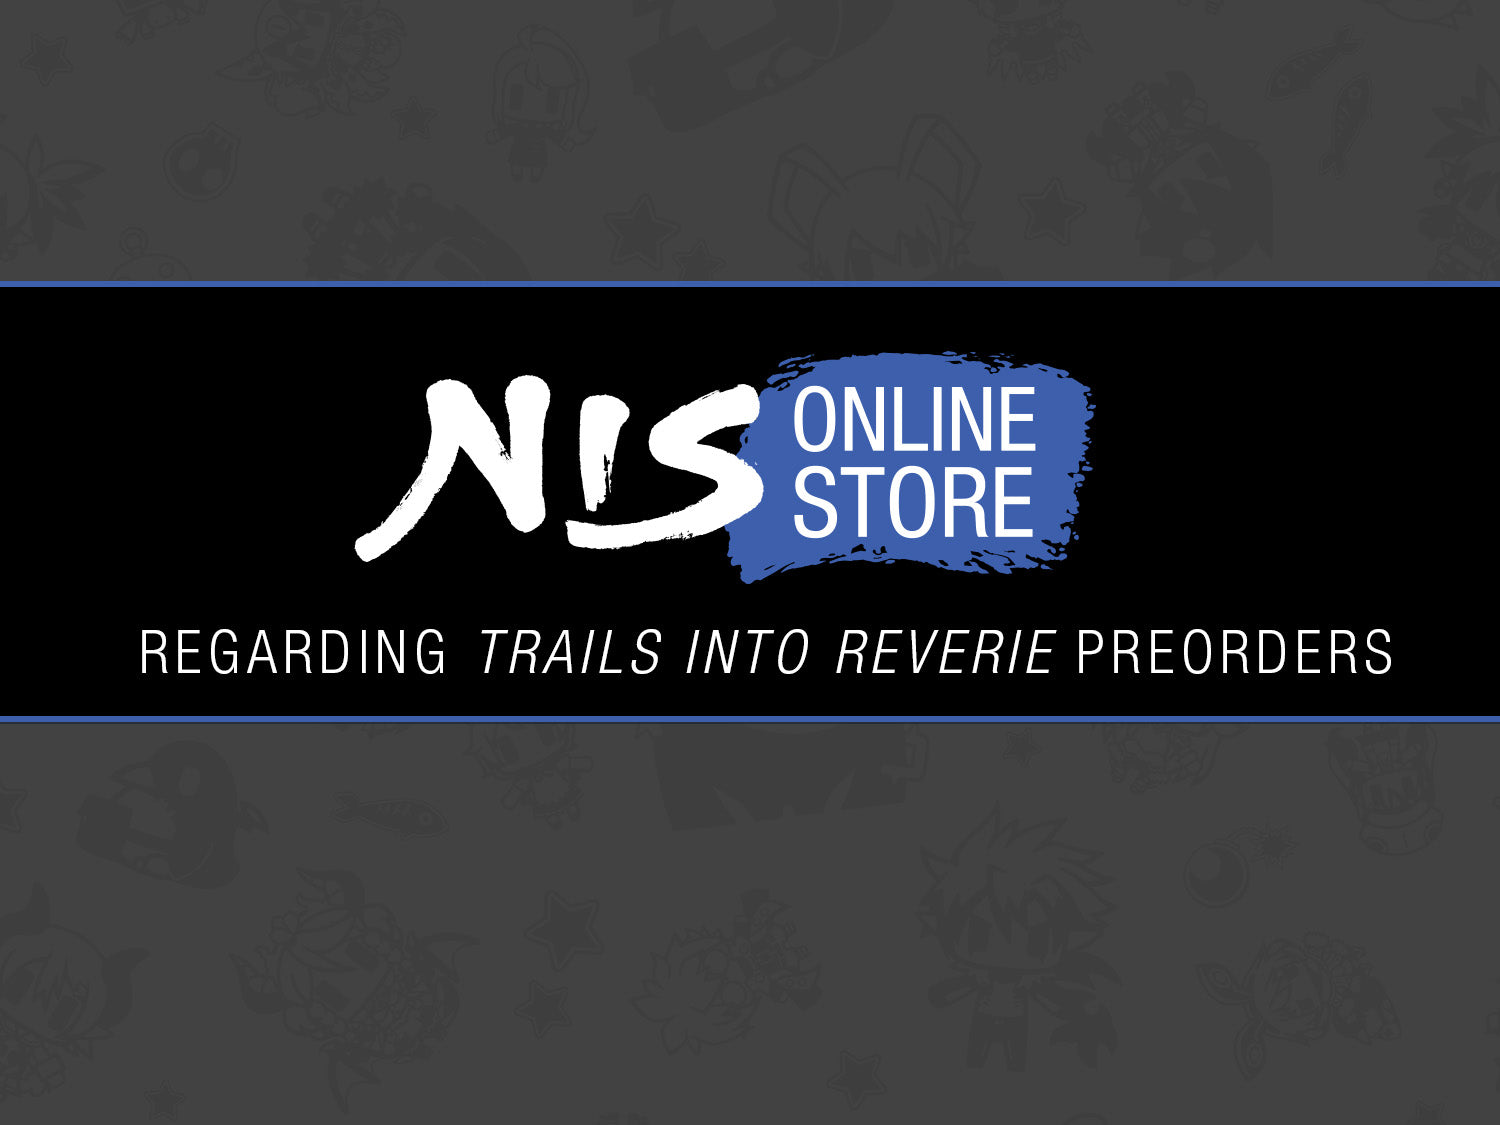 Common Questions for Trails into Reverie Preorder Shipments